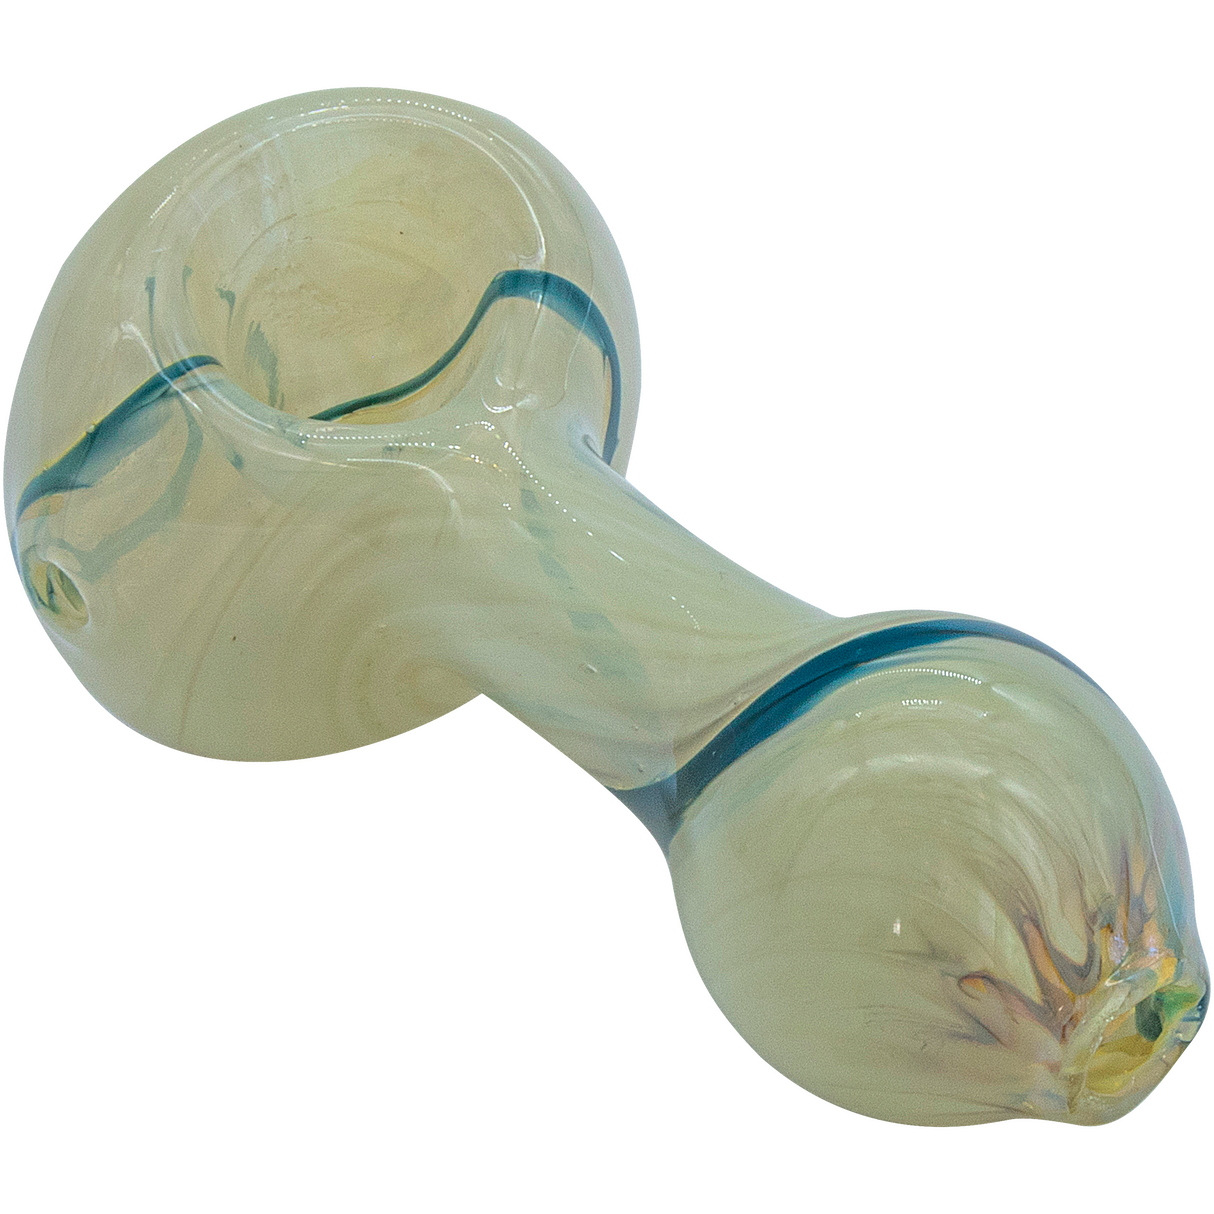 LA Pipes Bone White Spoon Pipe with Fumed Color Changing Design, 4.5" Long, for Dry Herbs